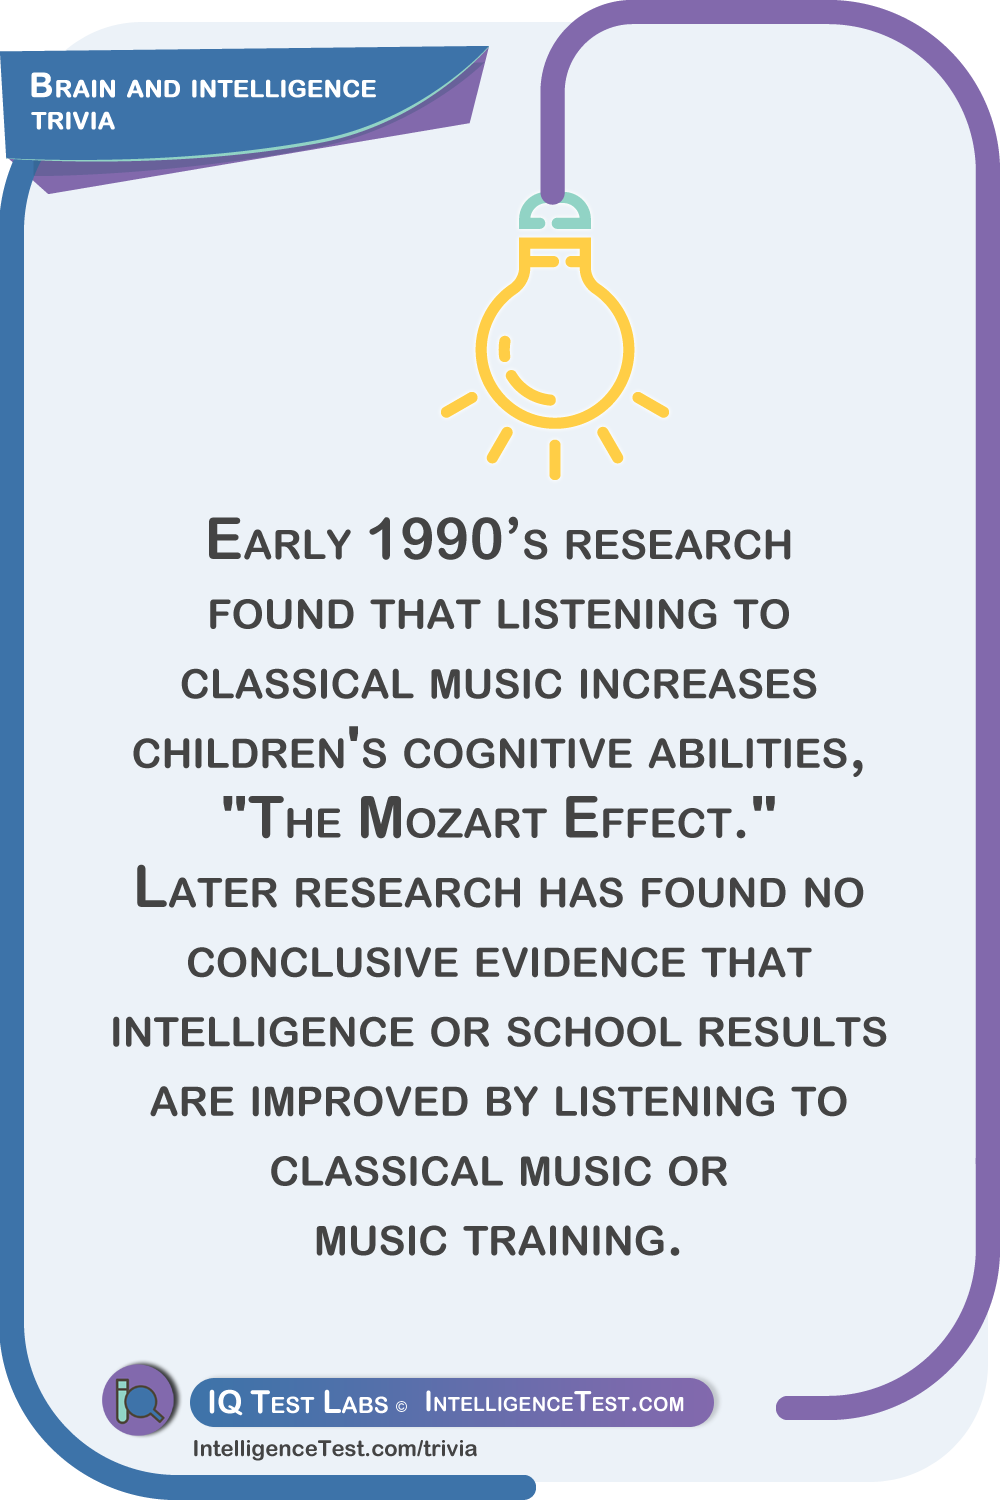 Early 1990’s research found that listening to classical music increases children's cognitive abilities, 'The Mozart Effect.' Later research has found no conclusive evidence that intelligence or school results are improved by listening to classical music or music training.